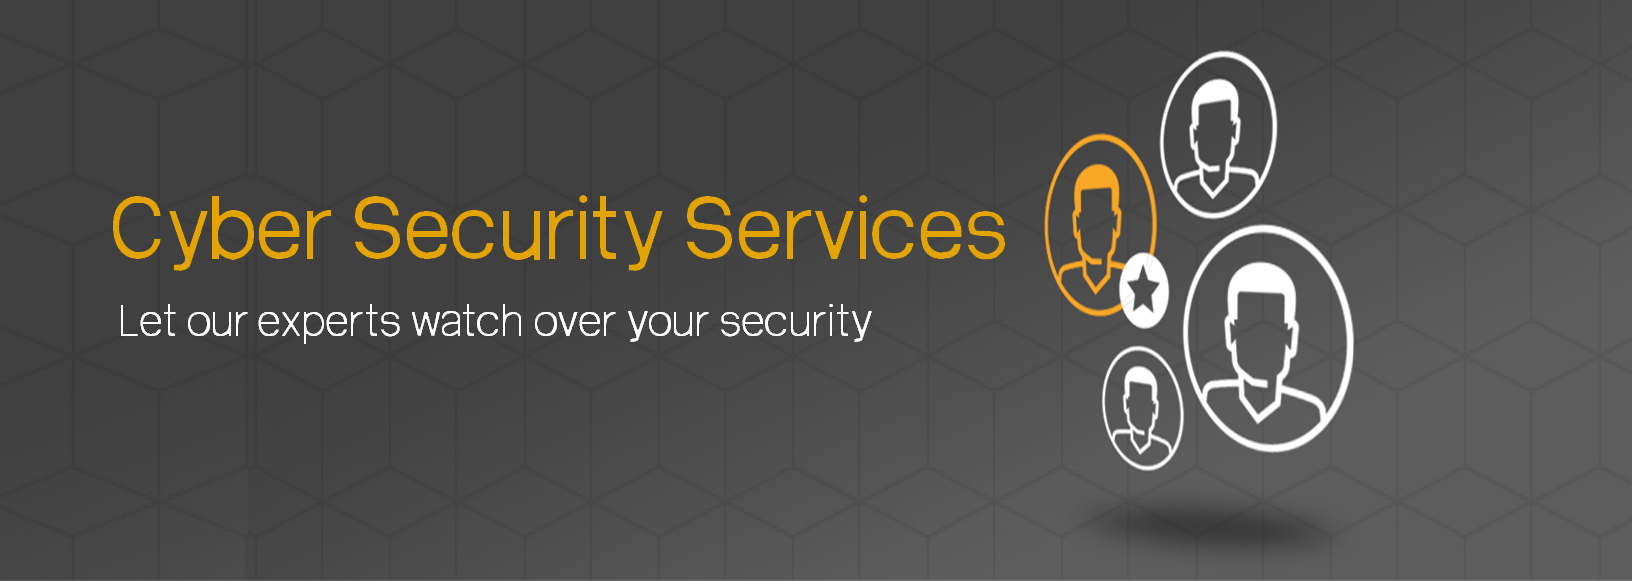 Symantec Cyber Security Services Products & Solutions